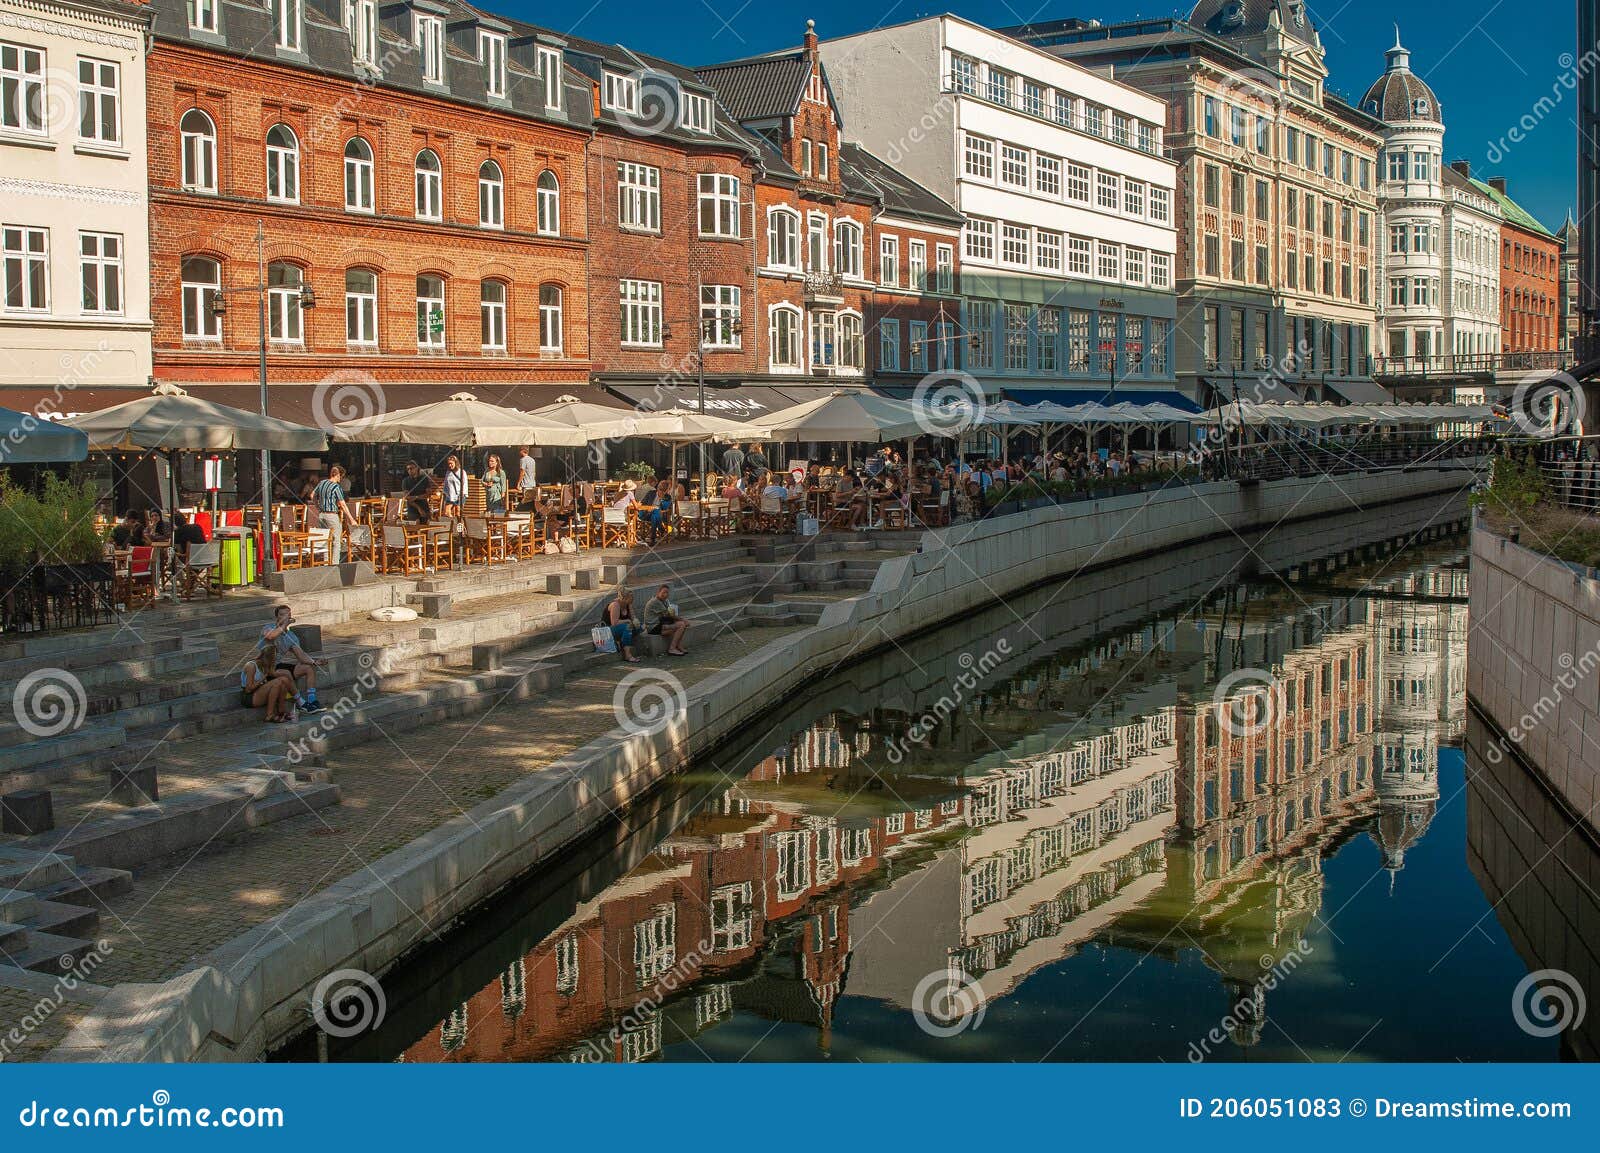 The River at Aarhus Day Editorial Stock Photo - Image situated, indre: 206051083